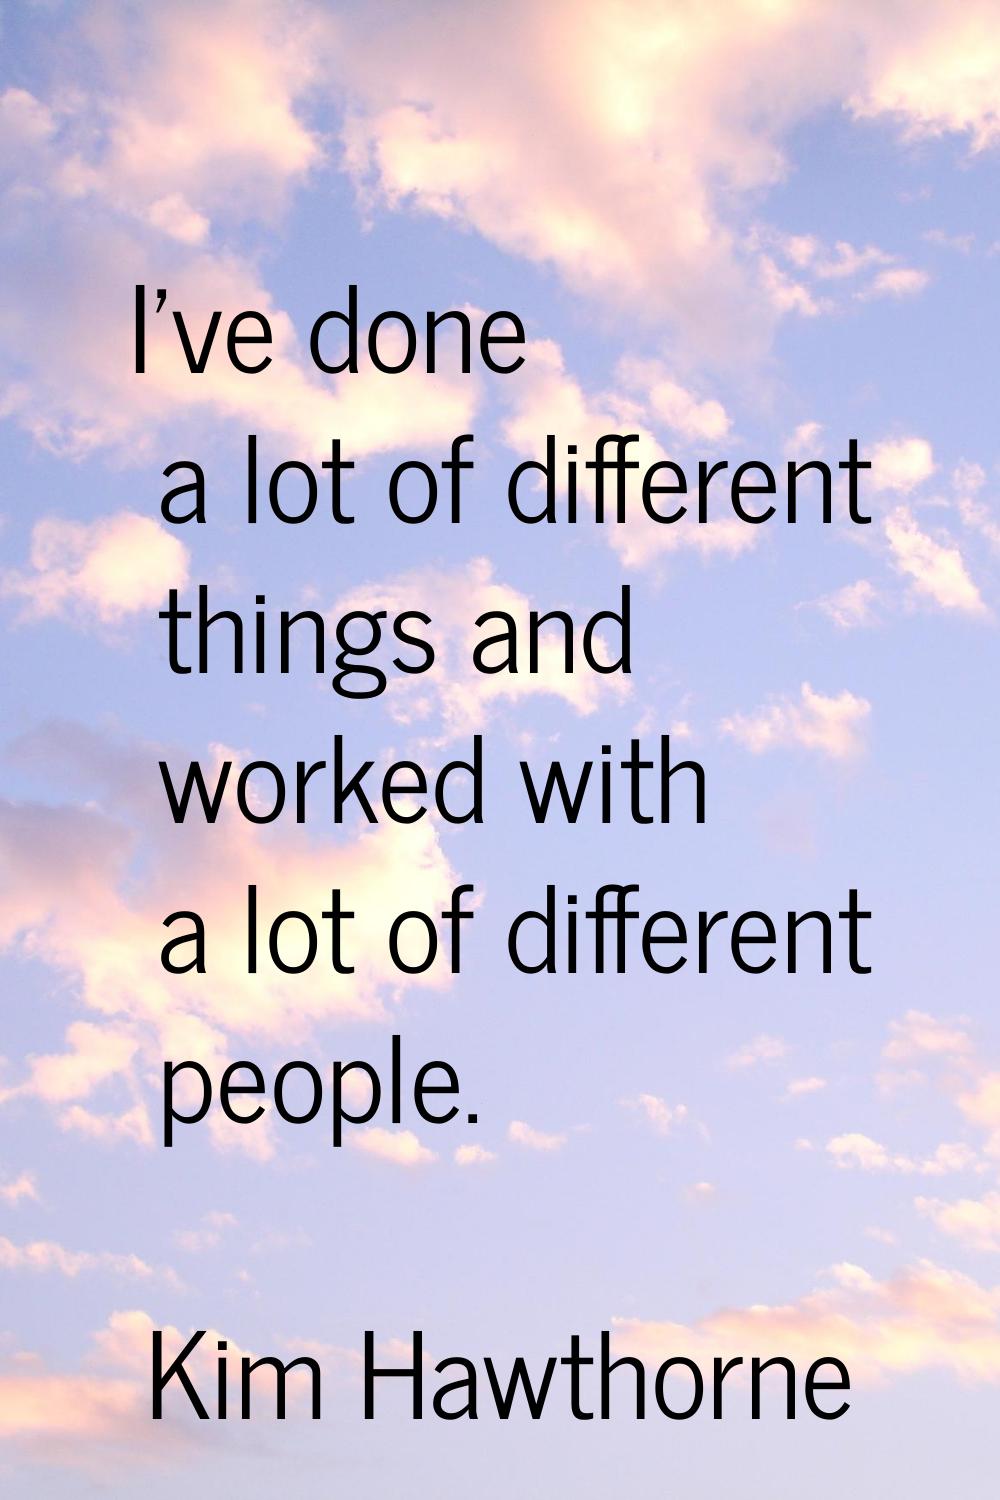 I've done a lot of different things and worked with a lot of different people.